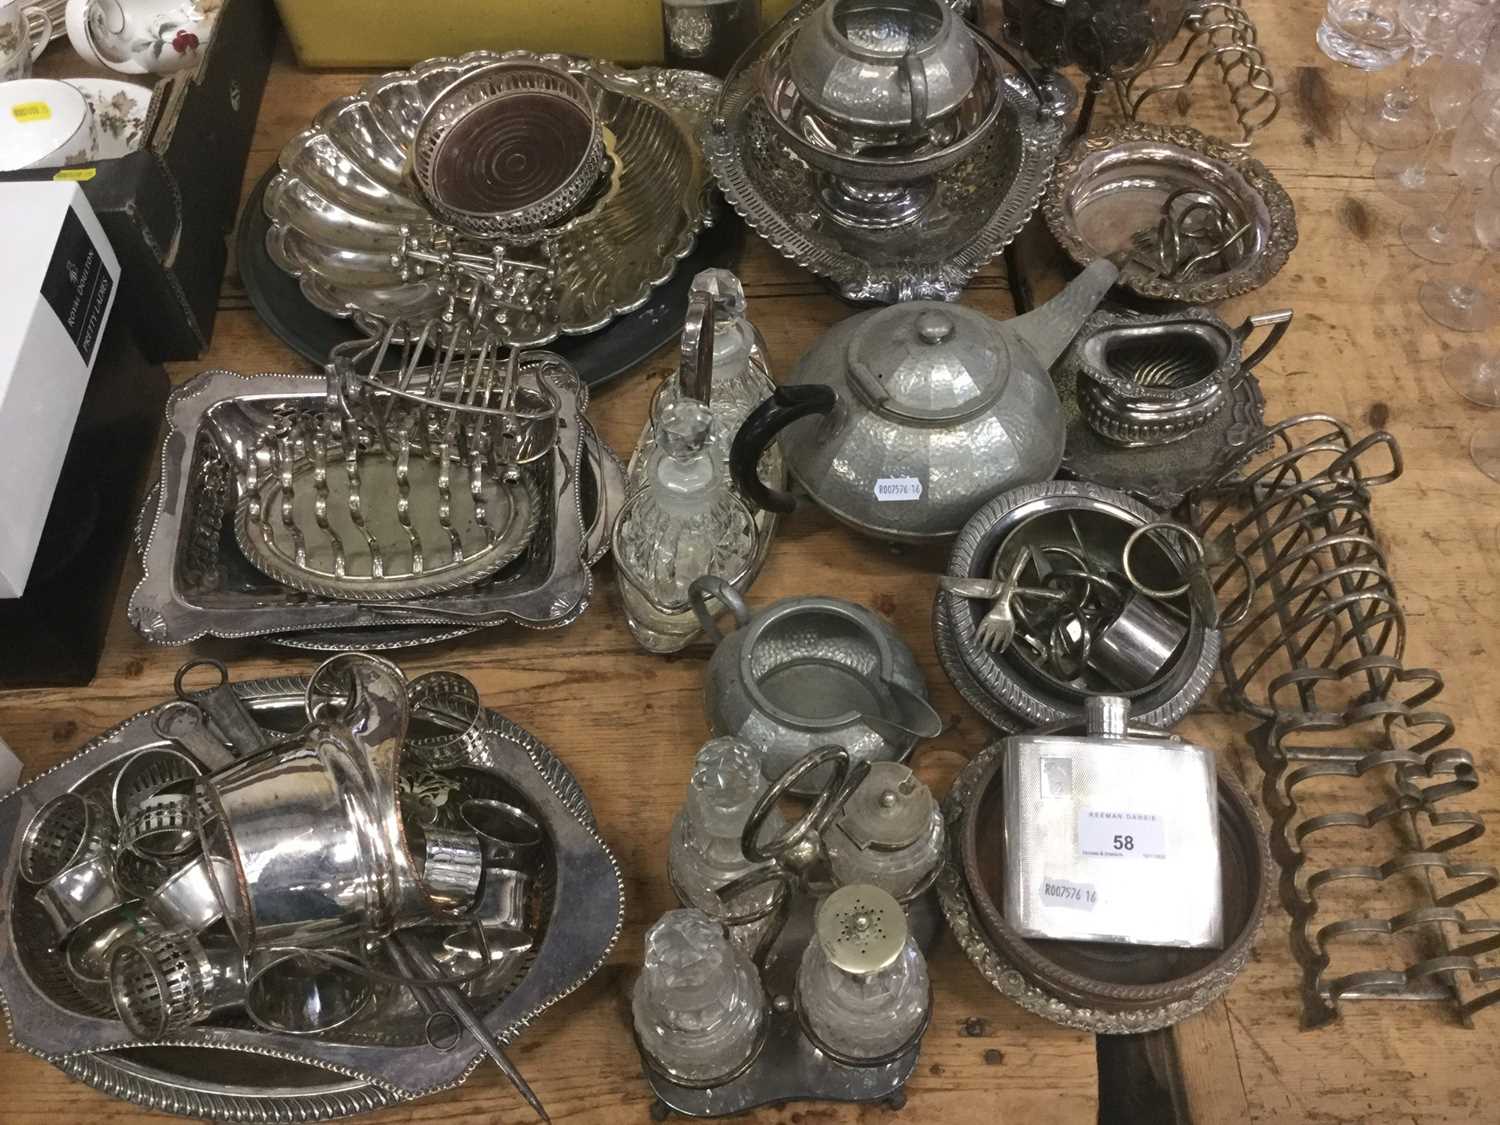 Large collection of silver plate to include cutlery, baskets, wine coasters, napkin rings and other